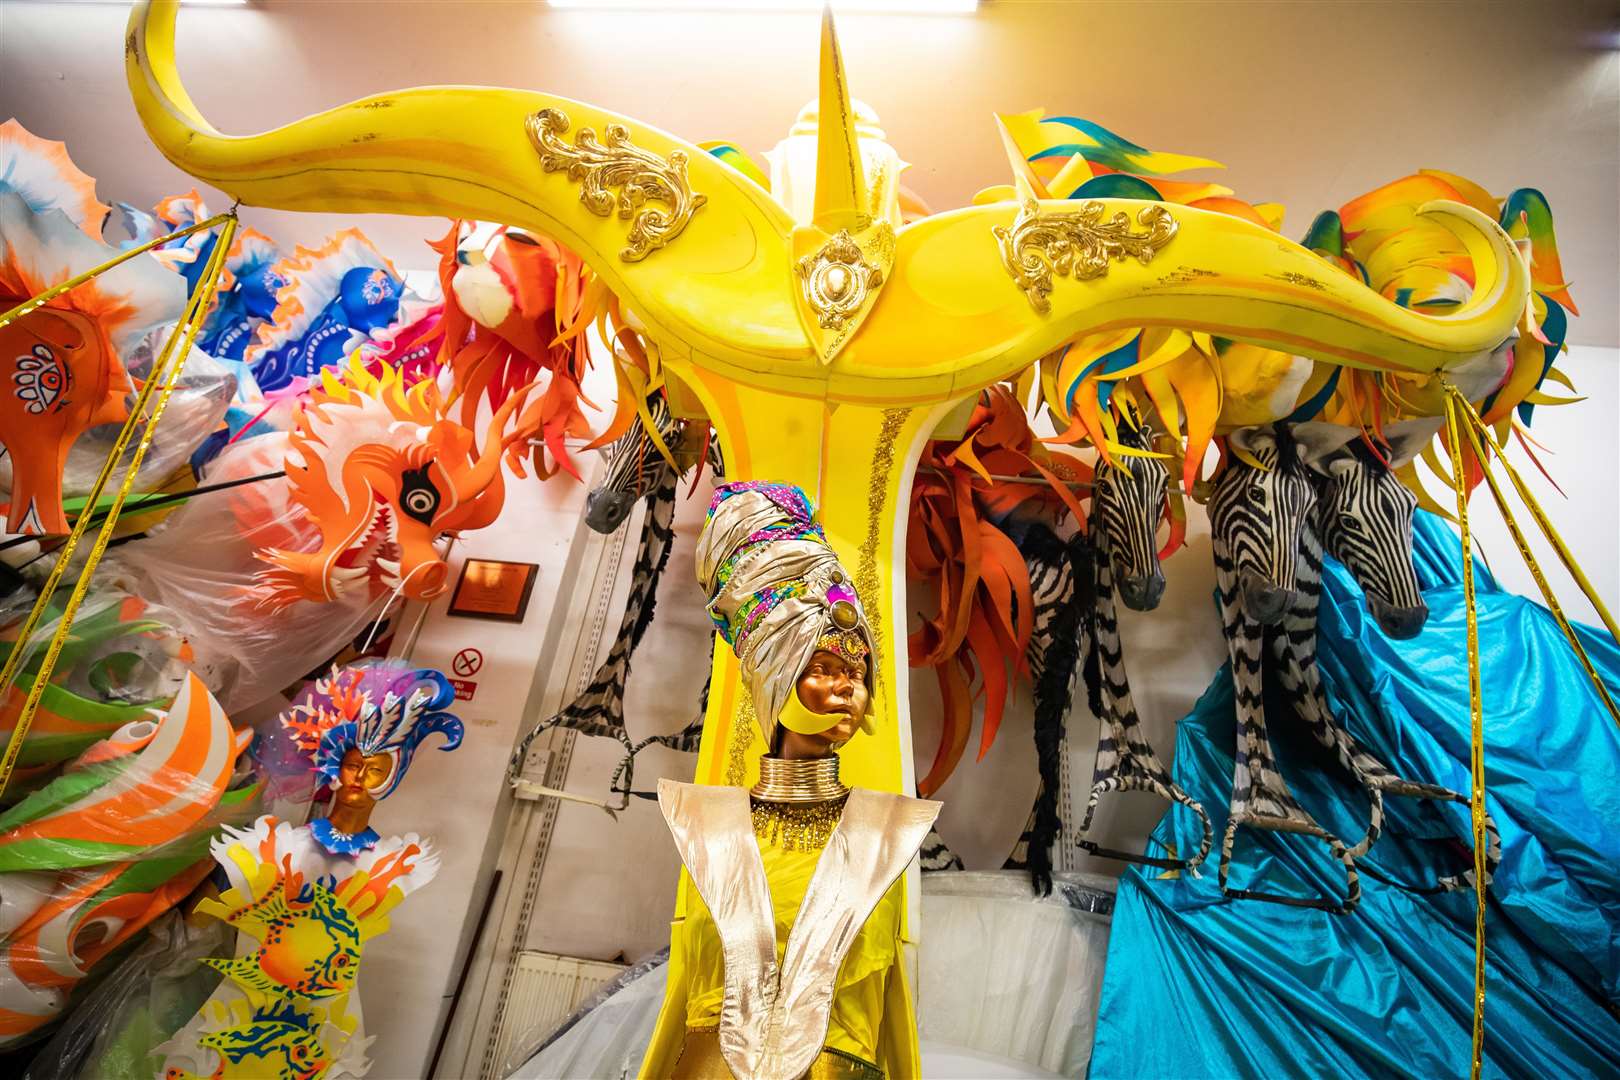 Costumes from previous Notting Hill Carnivals in a shop in Harlesden, north London (Aaron Chown/PA)